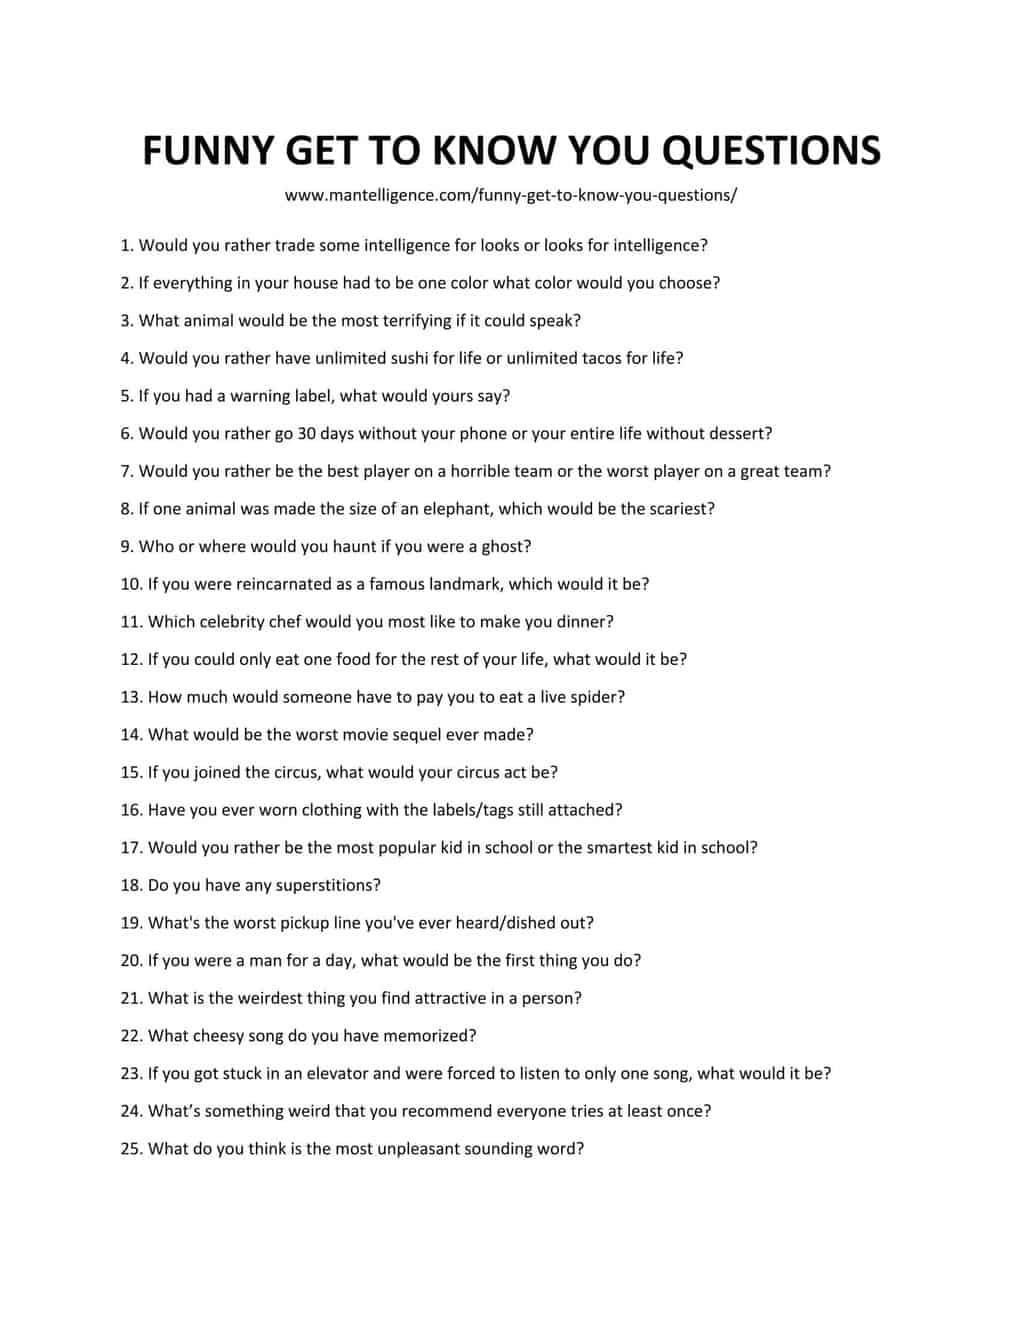 109 Funny Get to Know You Questions to Ask People